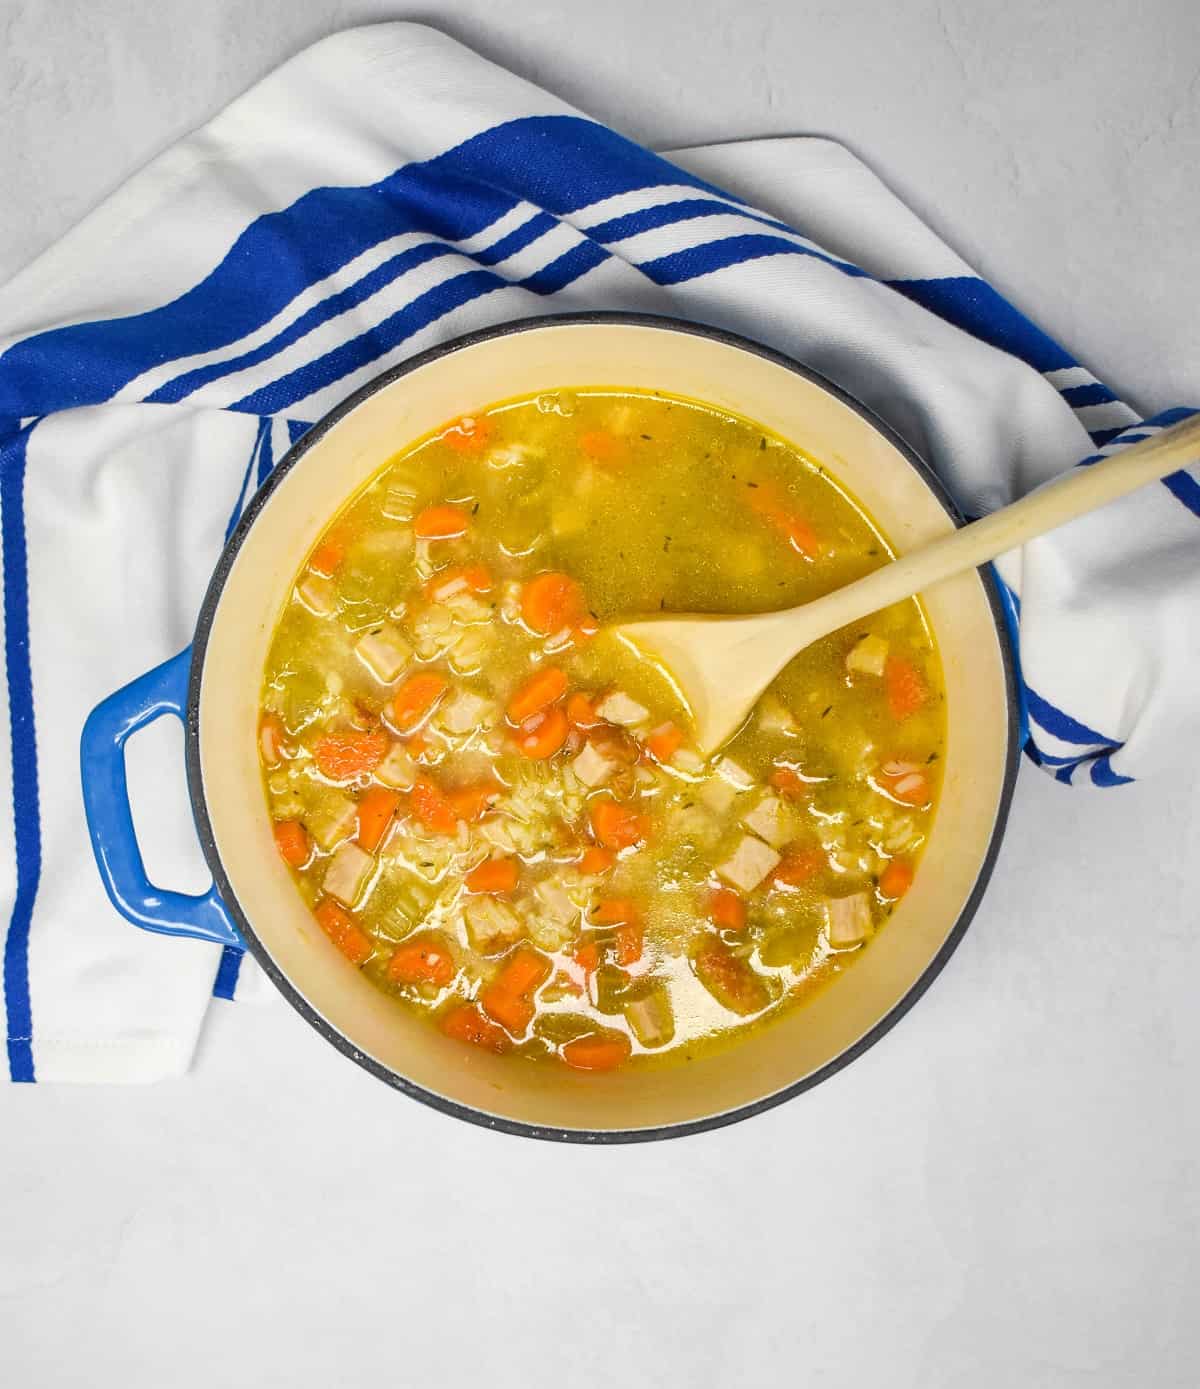 An image of the turkey and rice soup in a blue pot that is set on a white table with a blue and white kitchen towel and a wooden spoon in the pot.